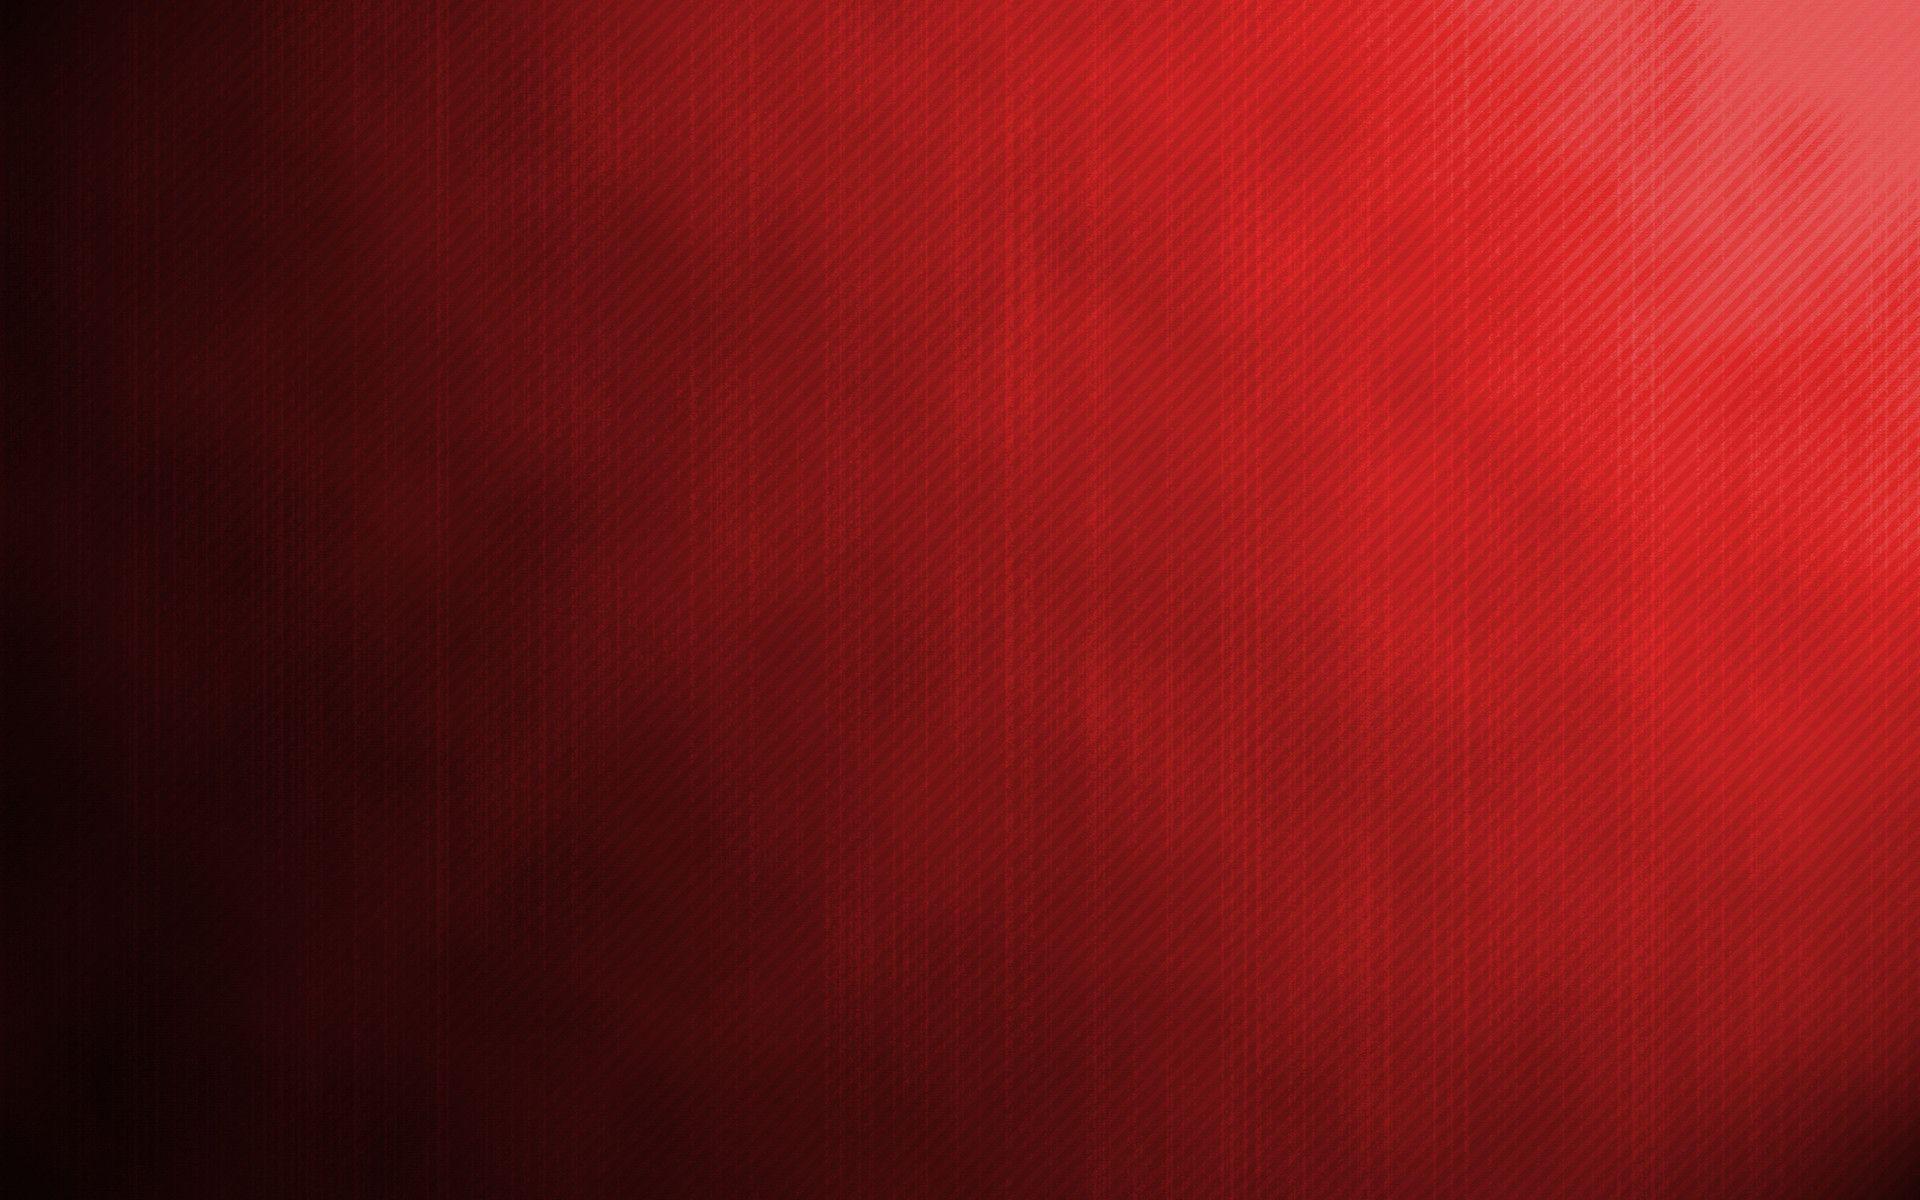 Red Backgrounds Wallpapers Wallpaper Cave